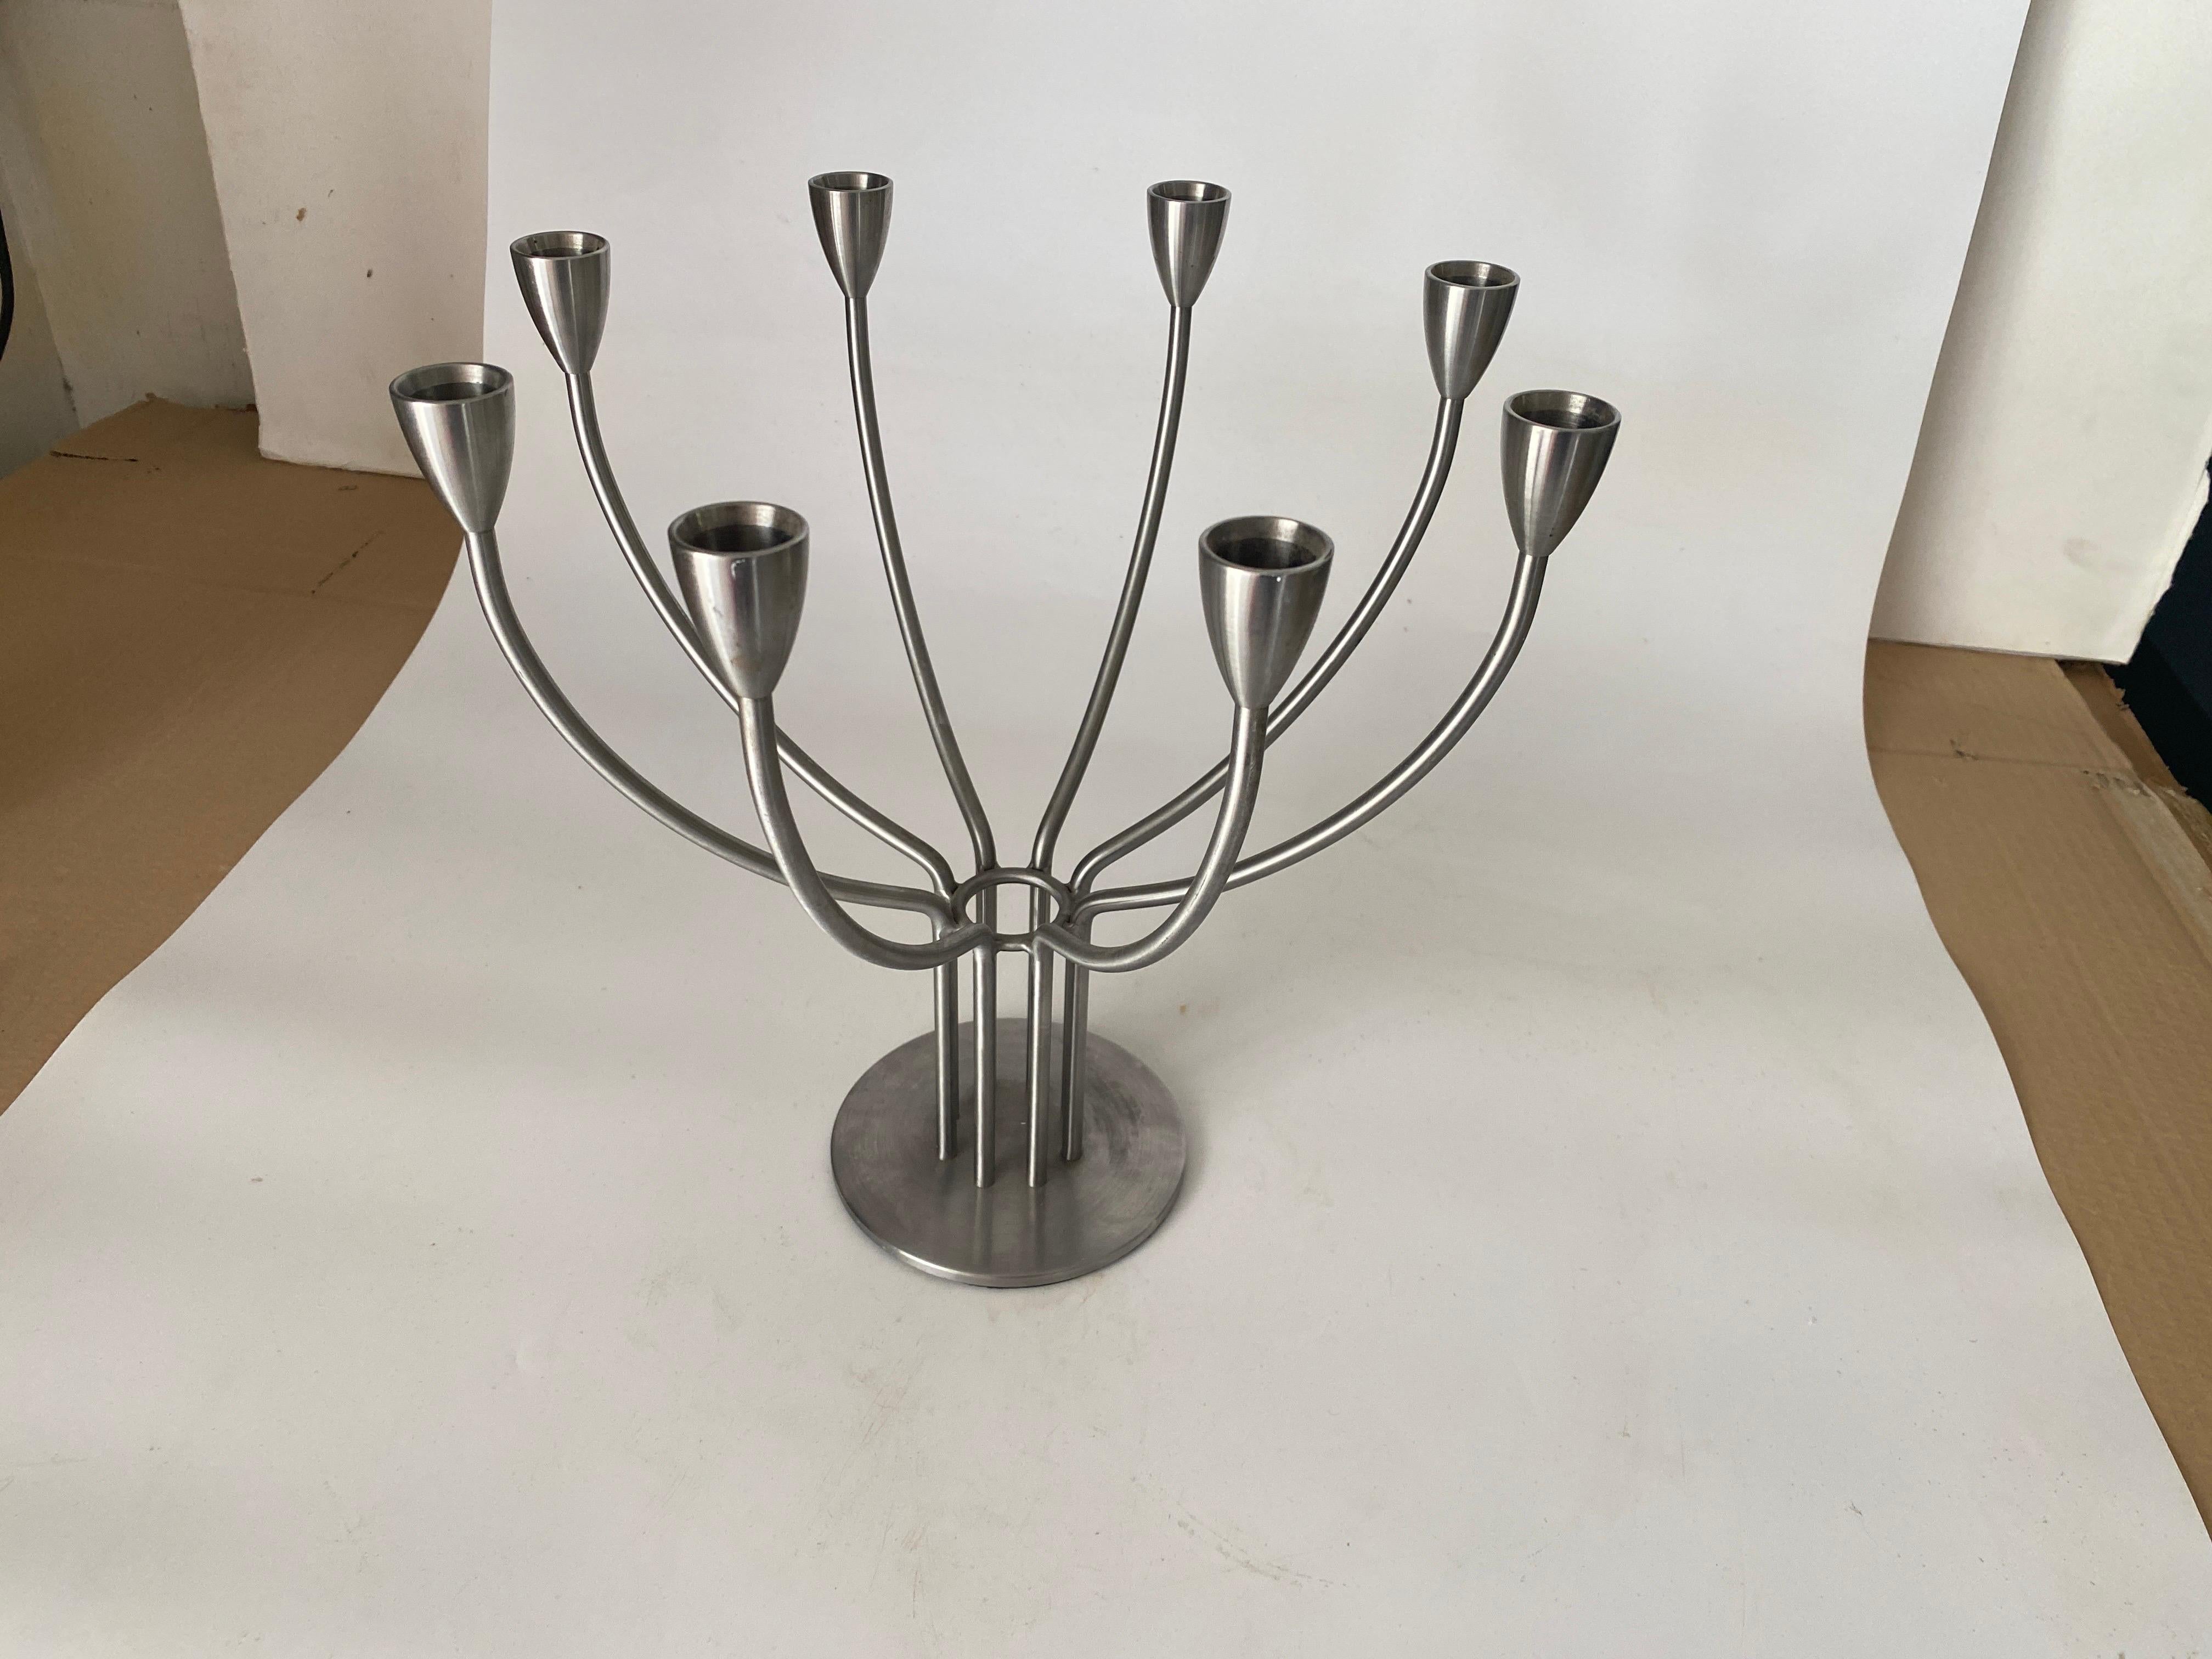 Scandinavian Modern Metal Candleholder by Hagberg Swenden 20th Century Siver color 8 Arms For Sale